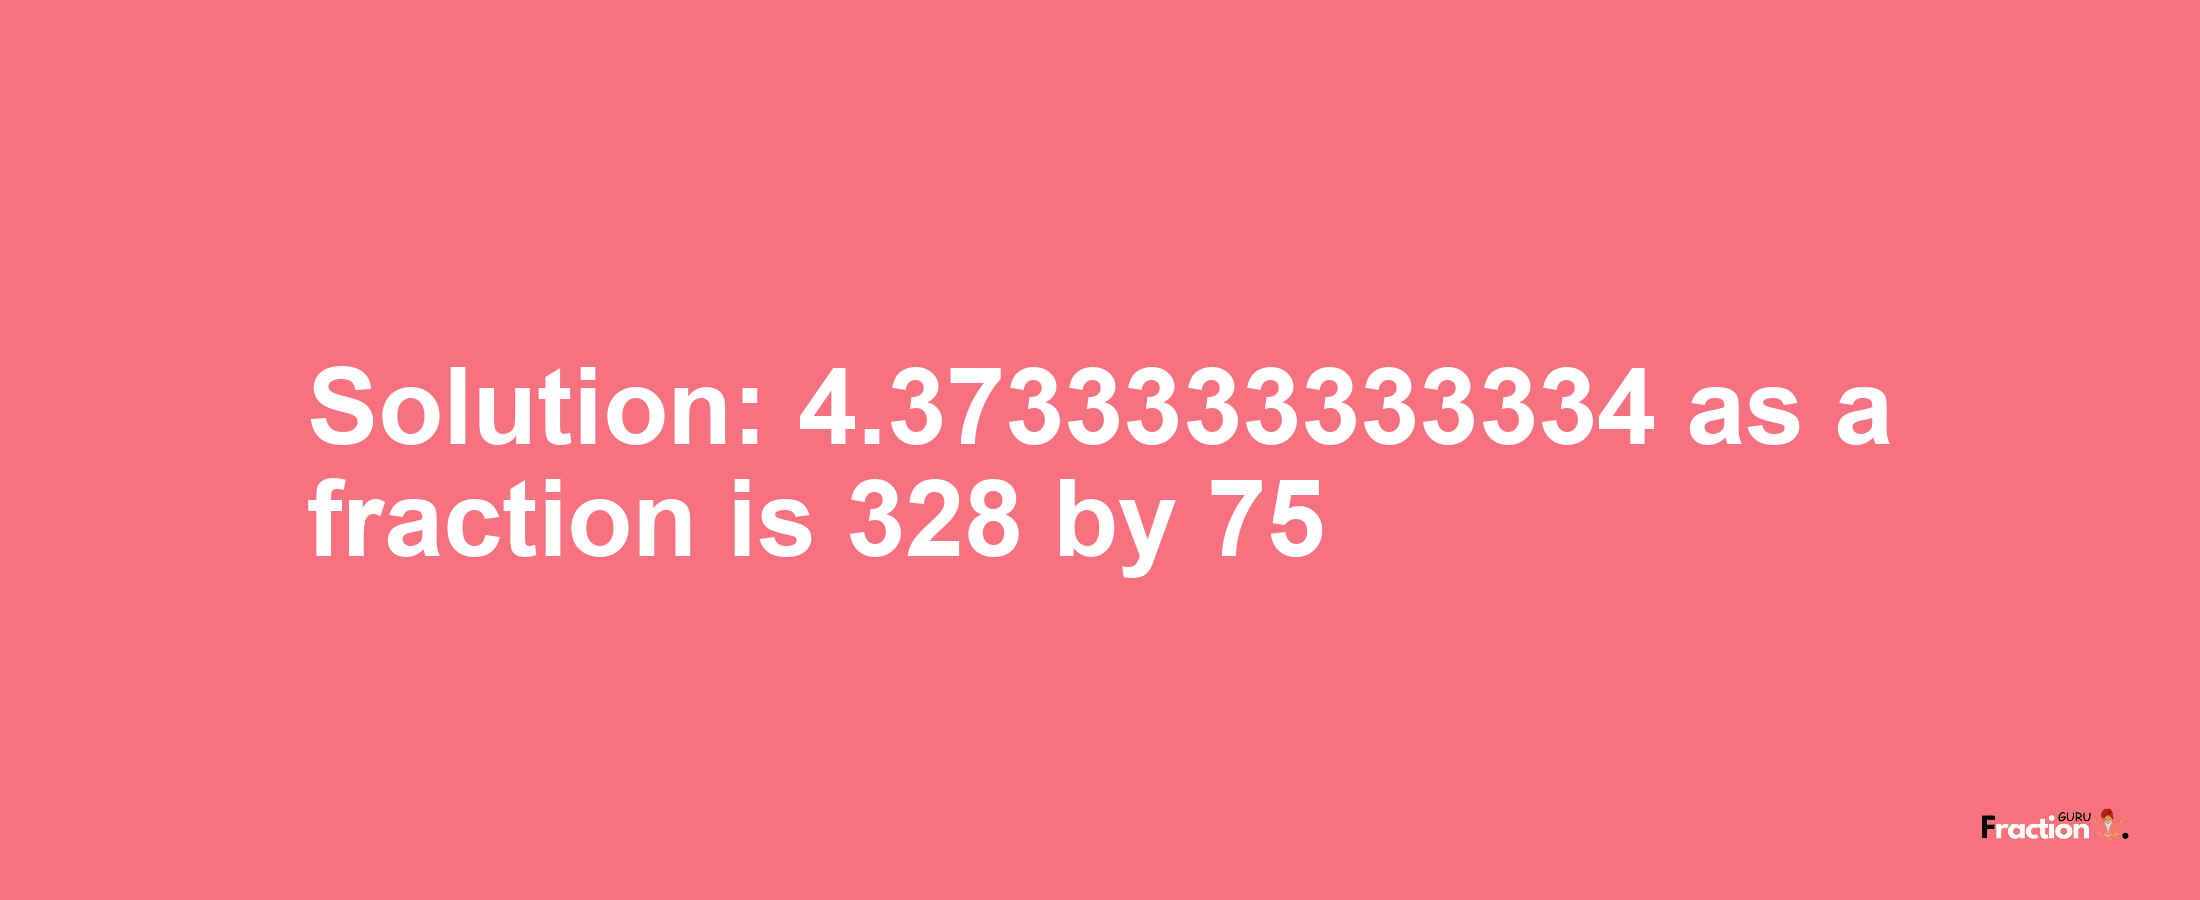 Solution:4.3733333333334 as a fraction is 328/75